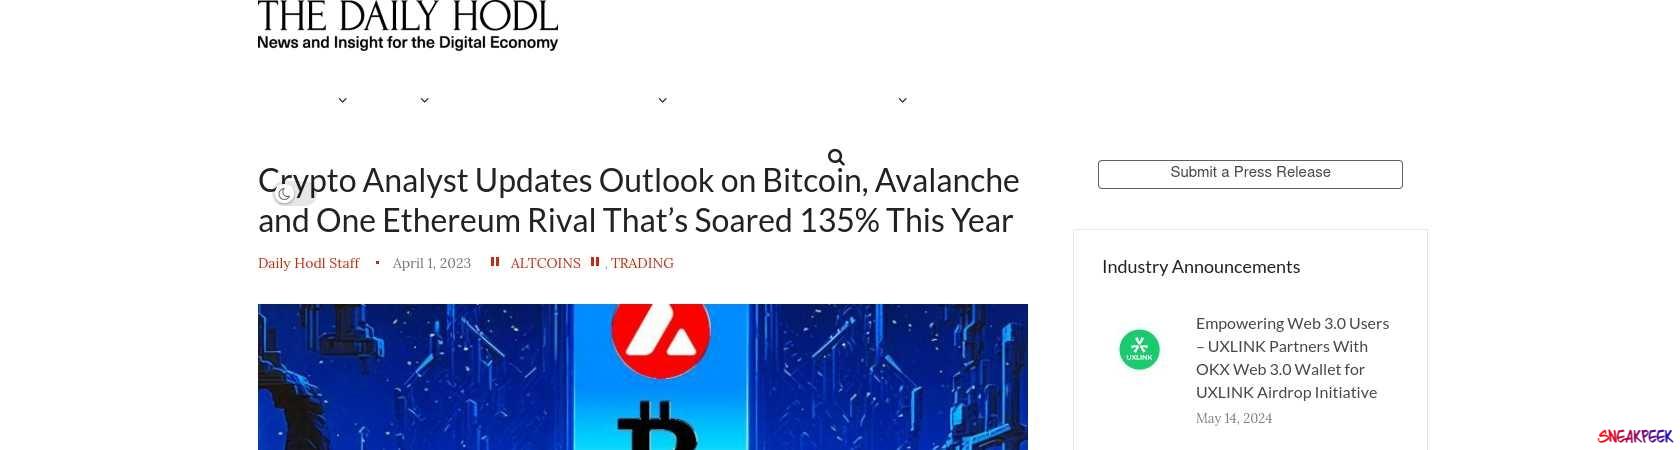 Read the full Article:  ⭲ Crypto Analyst Updates Outlook on Bitcoin, Avalanche and One Ethereum Rival That’s Soared 135% This Year